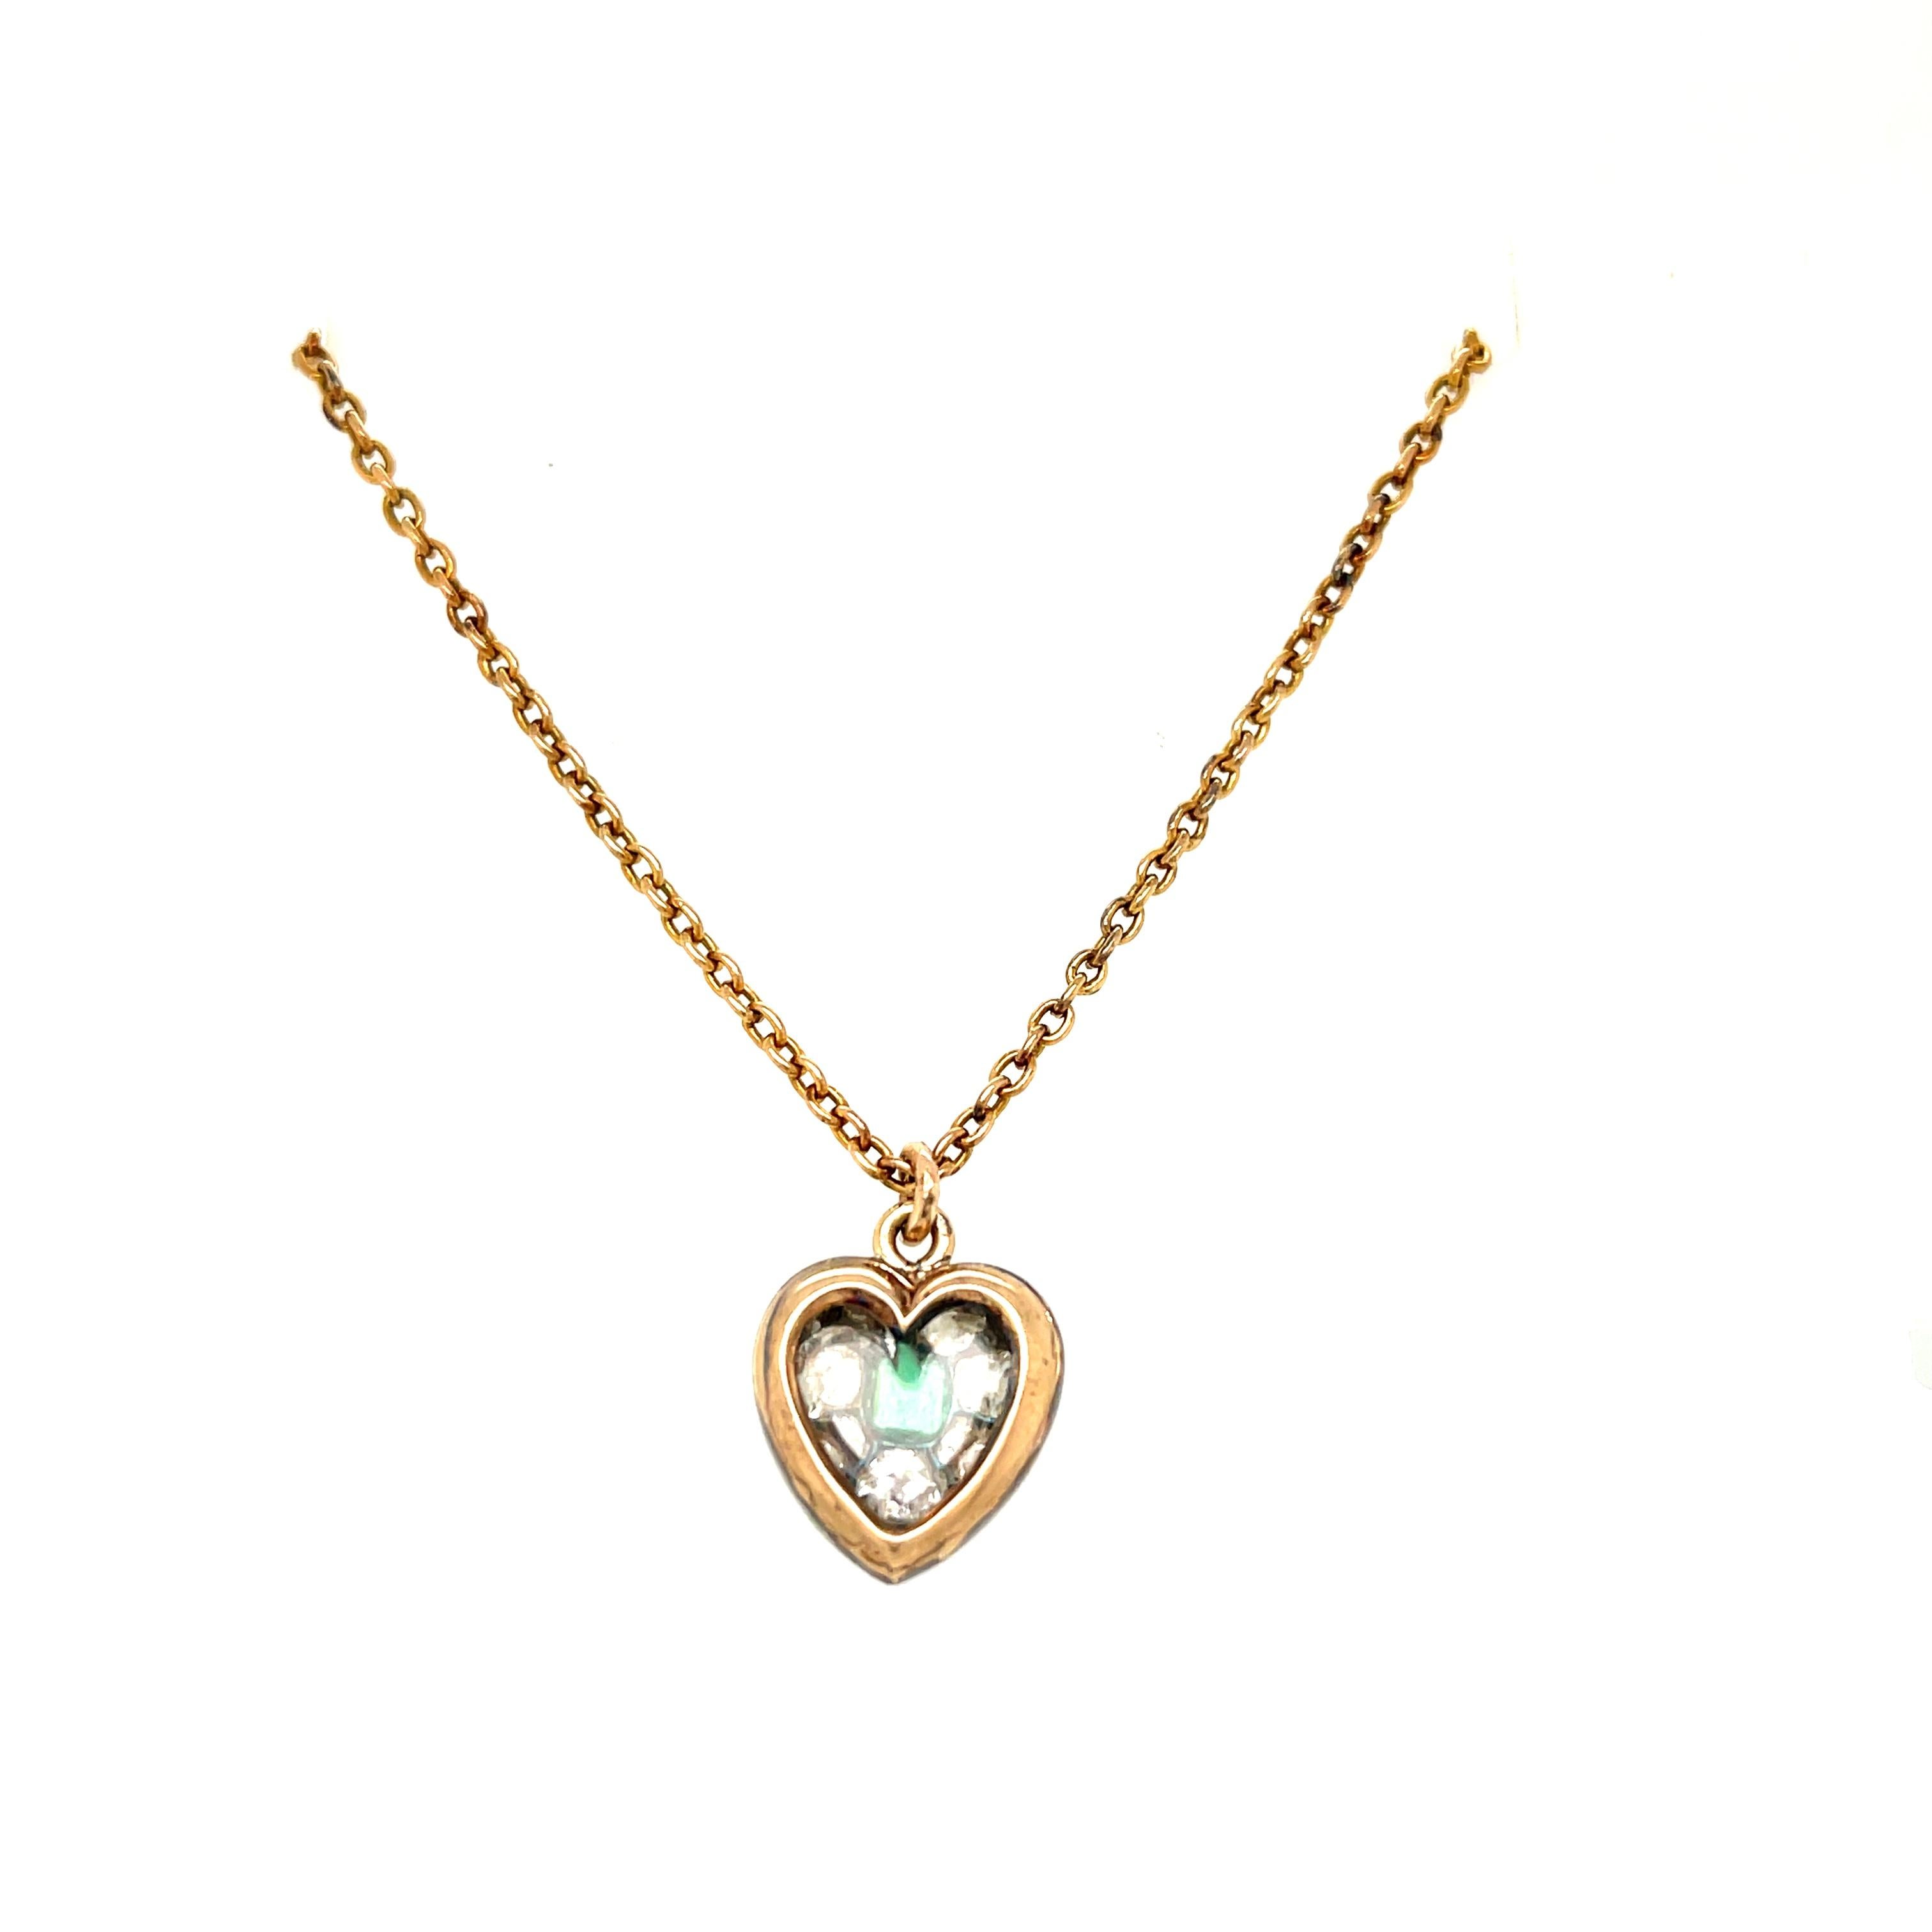 An antique silver topped 15k gold old mine diamond heart pendant set with a square cut emerald, circa 1880. This sweet heart is set with 31 old mine cut diamonds that are H to J color and VS to SI quality - approximately 1.80 carats. The larger